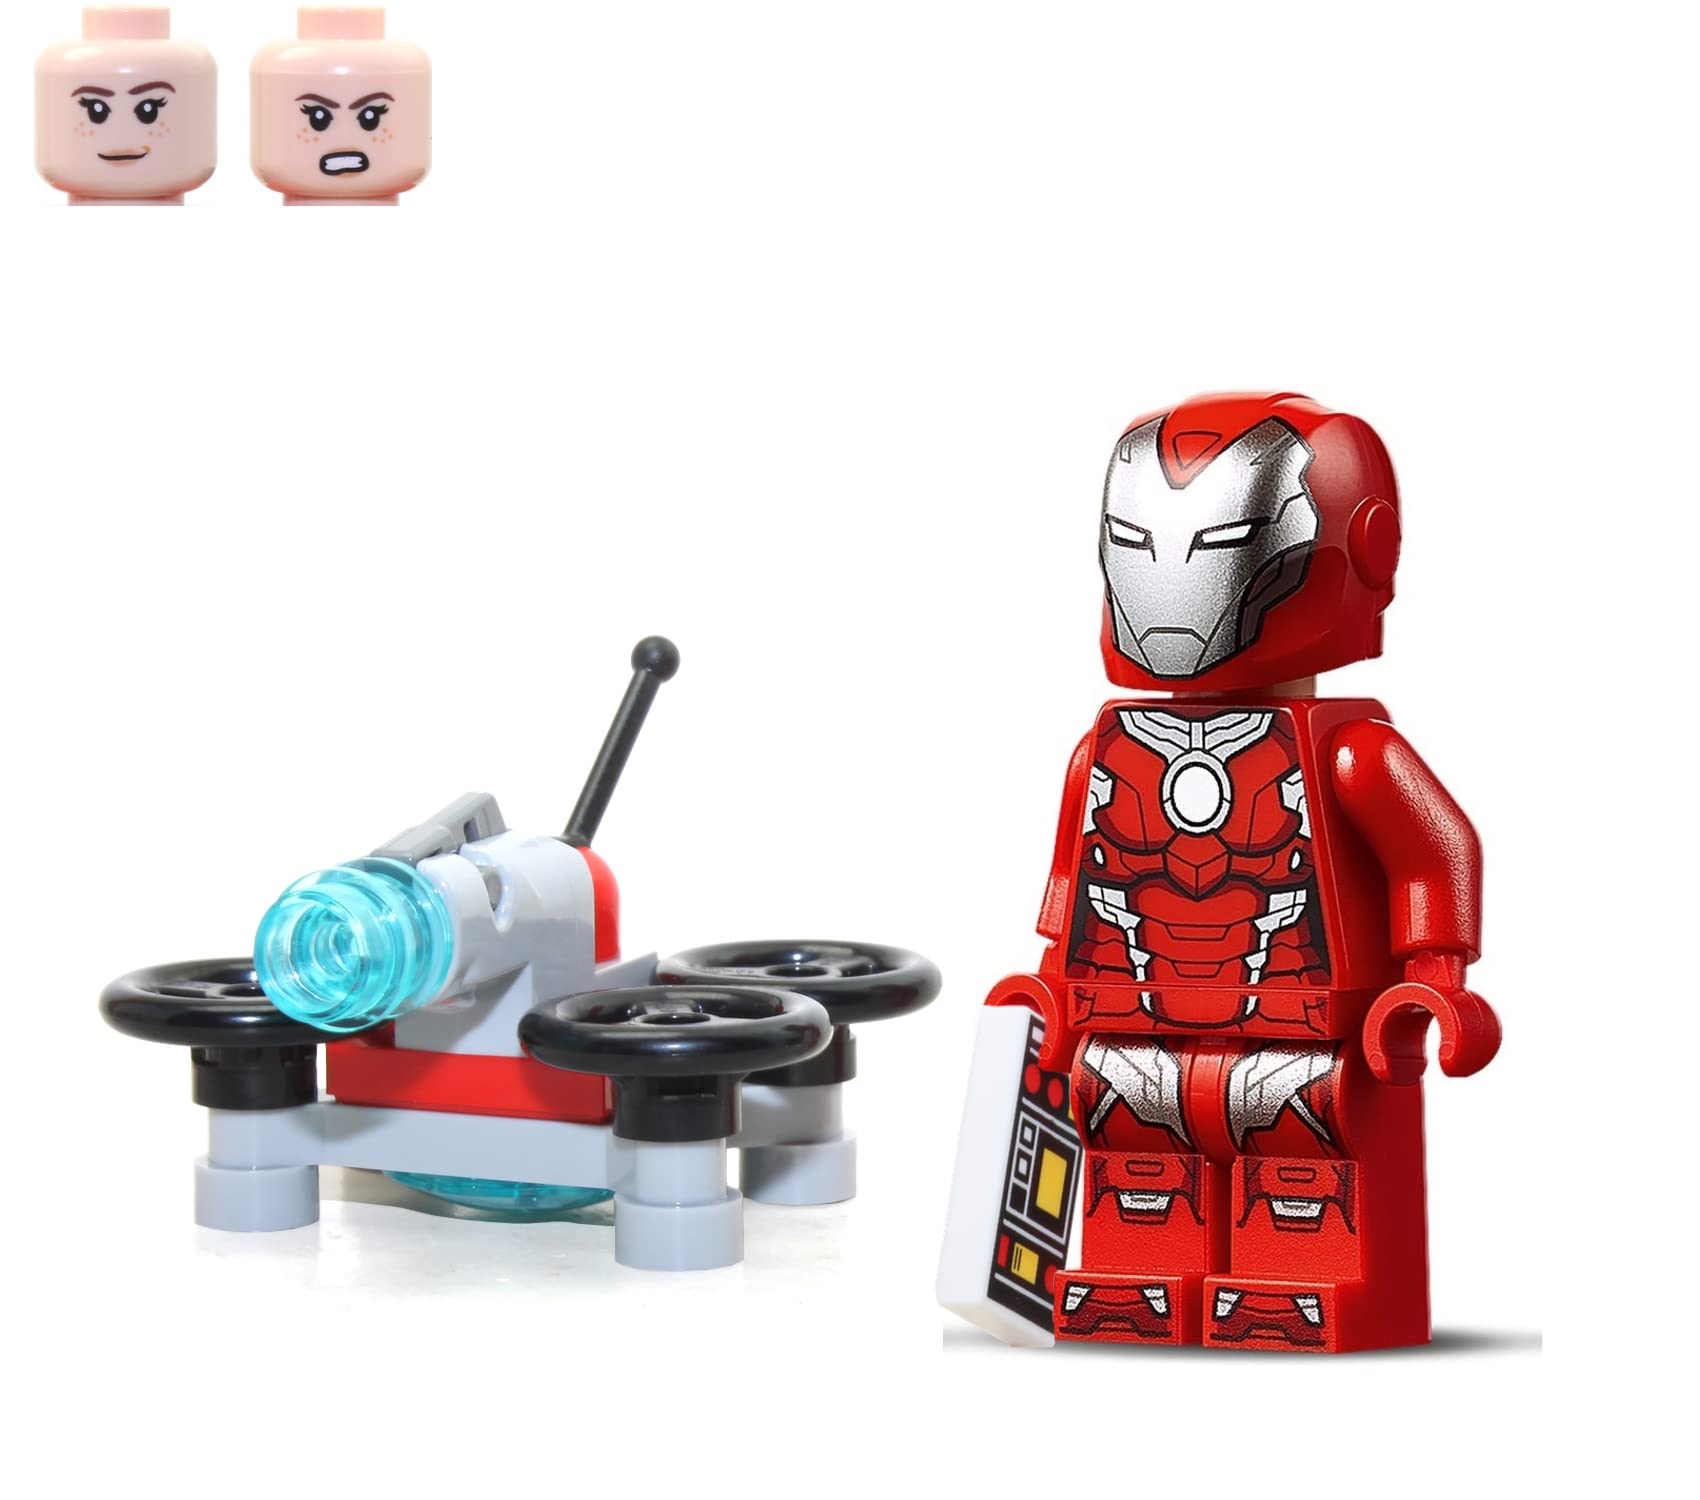 LEGO Marvel Super Heroes Avengers Infinity War Minifigure - Iron Rescue (Pepper Potts) in Red Armor with Drone 76164